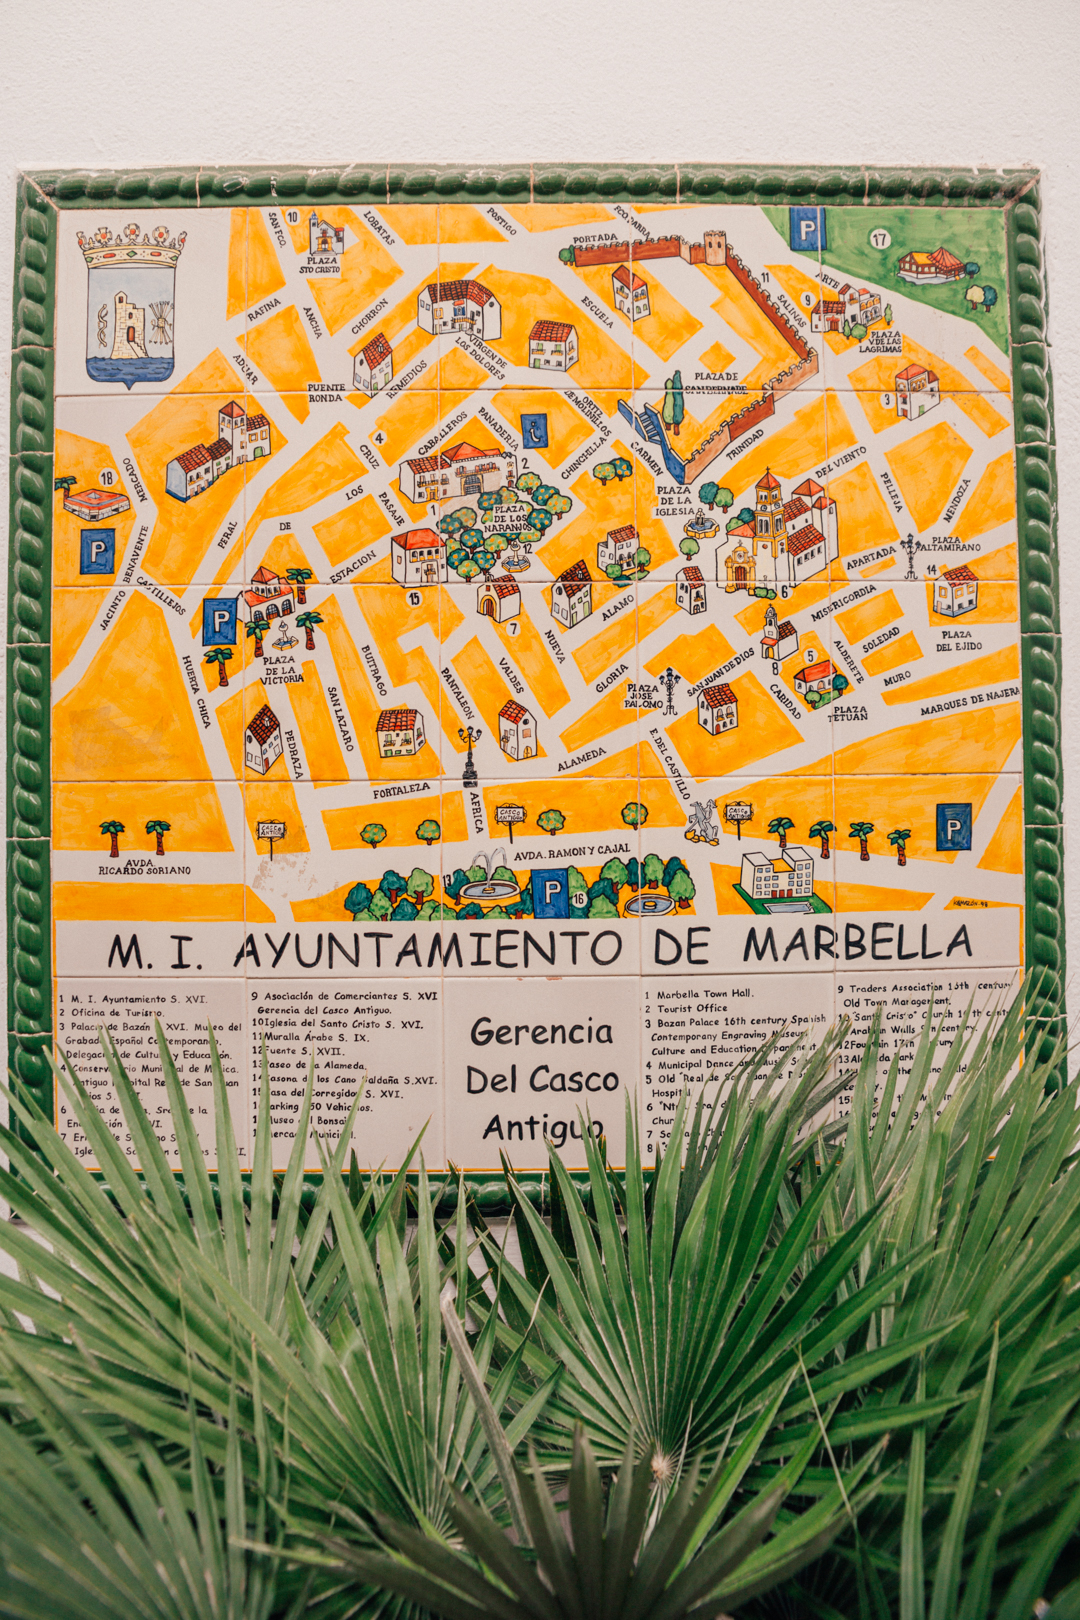 Tiled map of Marbella old town